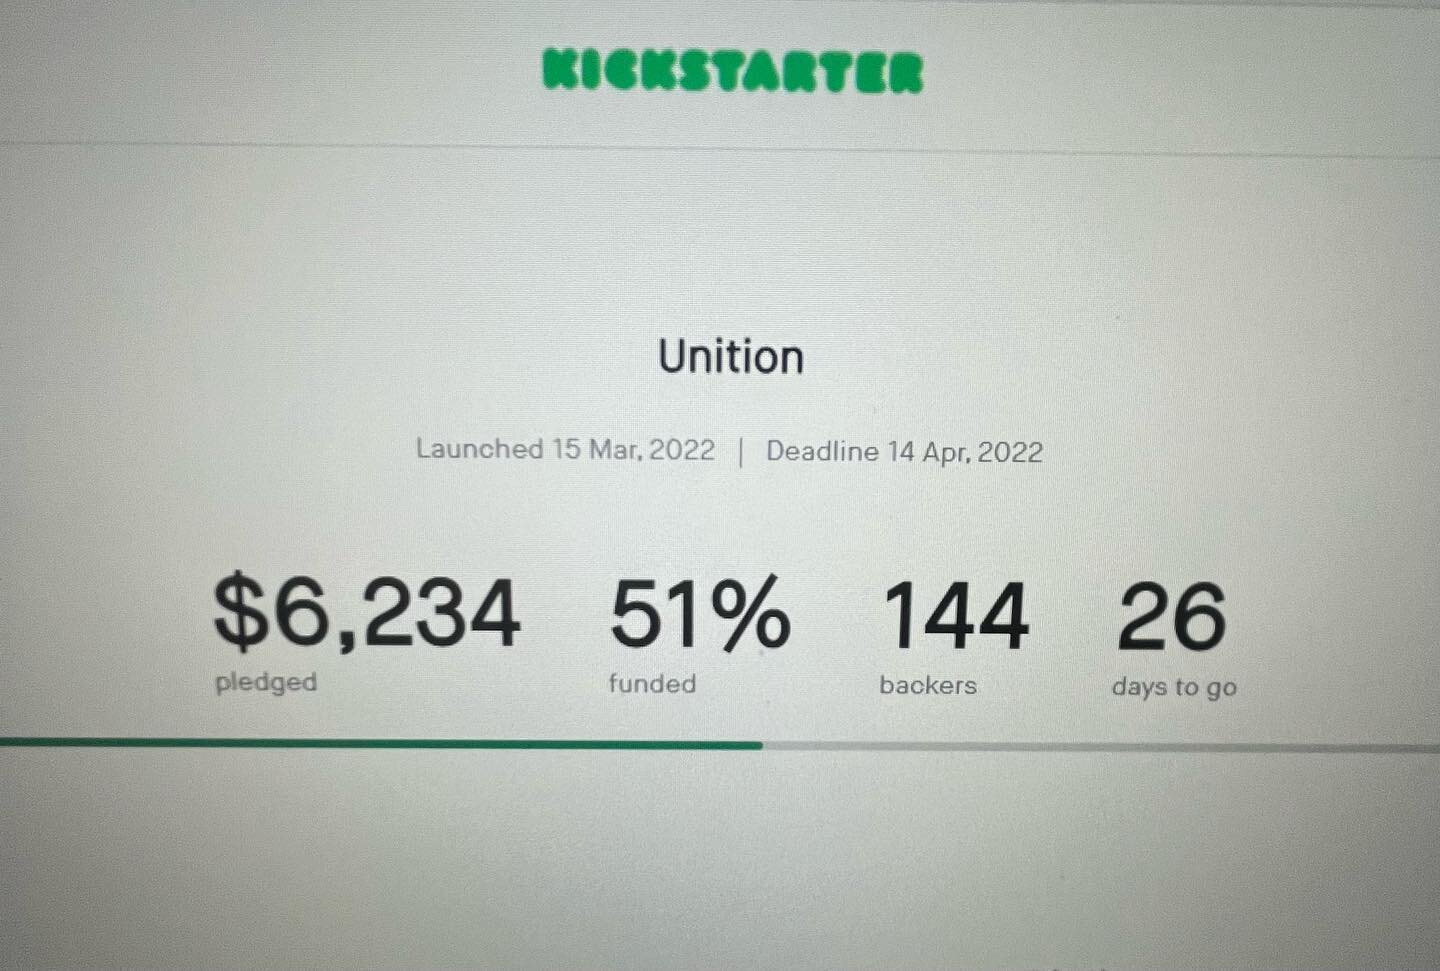 HALFWAY FUNDED!! Thanks to all our backers for this amazing progress in just the first three days of the @kickstarter campaign. 

We also had a blast playing the game in person with local friends @aleventures and Saga Games in Frederick Maryland. Spe